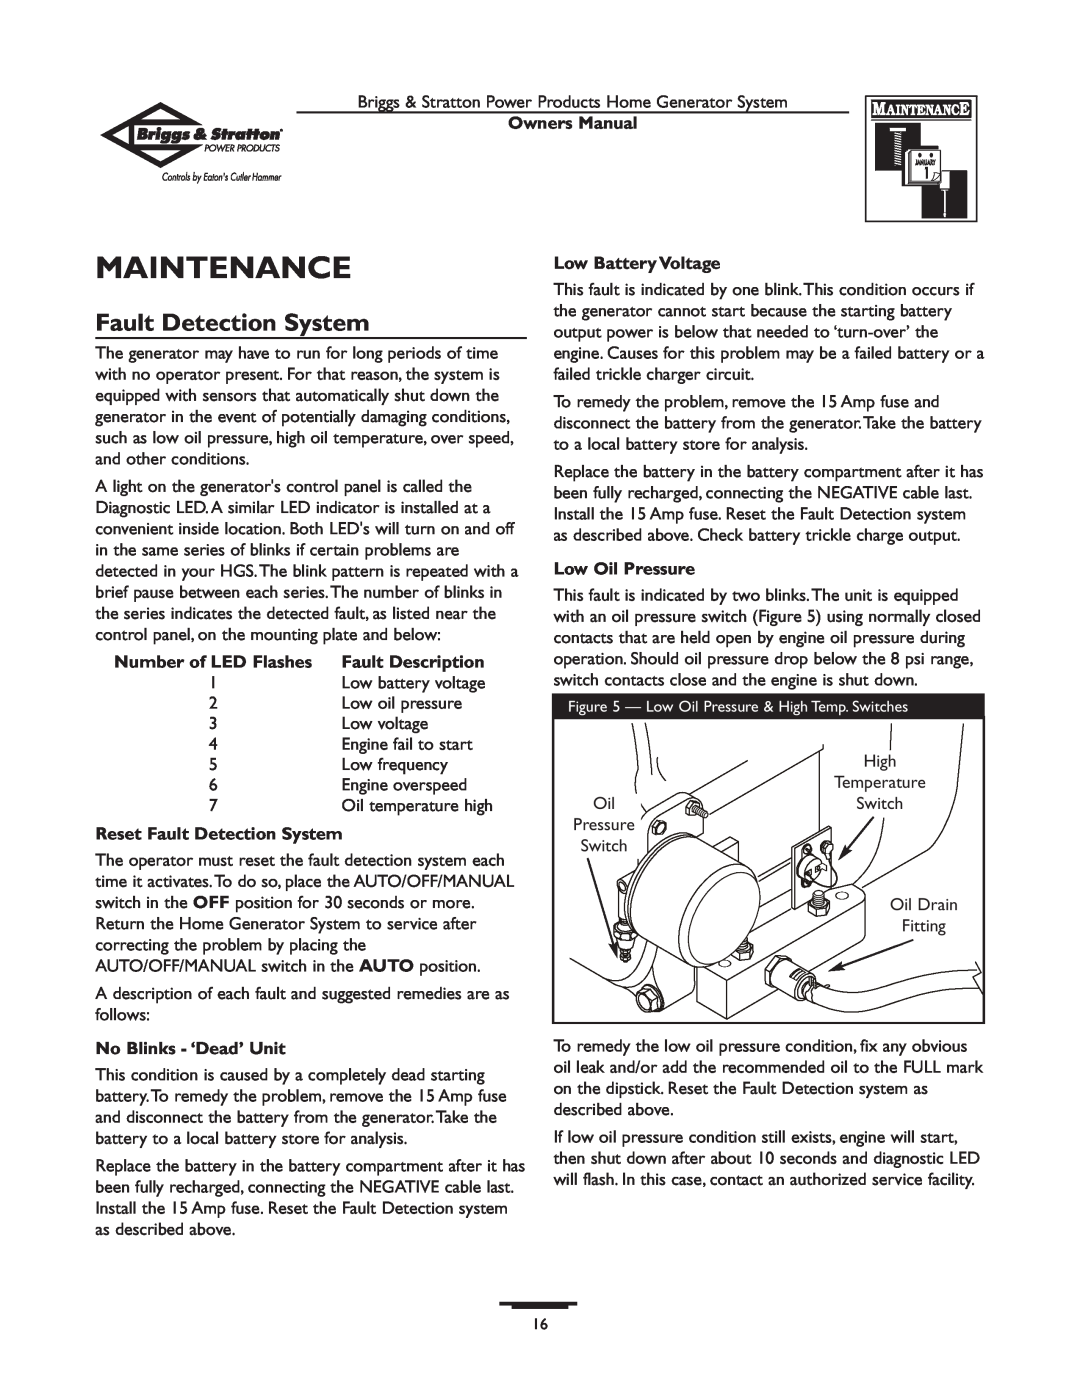 Briggs & Stratton 1679-0 Maintenance, Fault Detection System, Owners Manual, Number of LED Flashes, Fault Description 